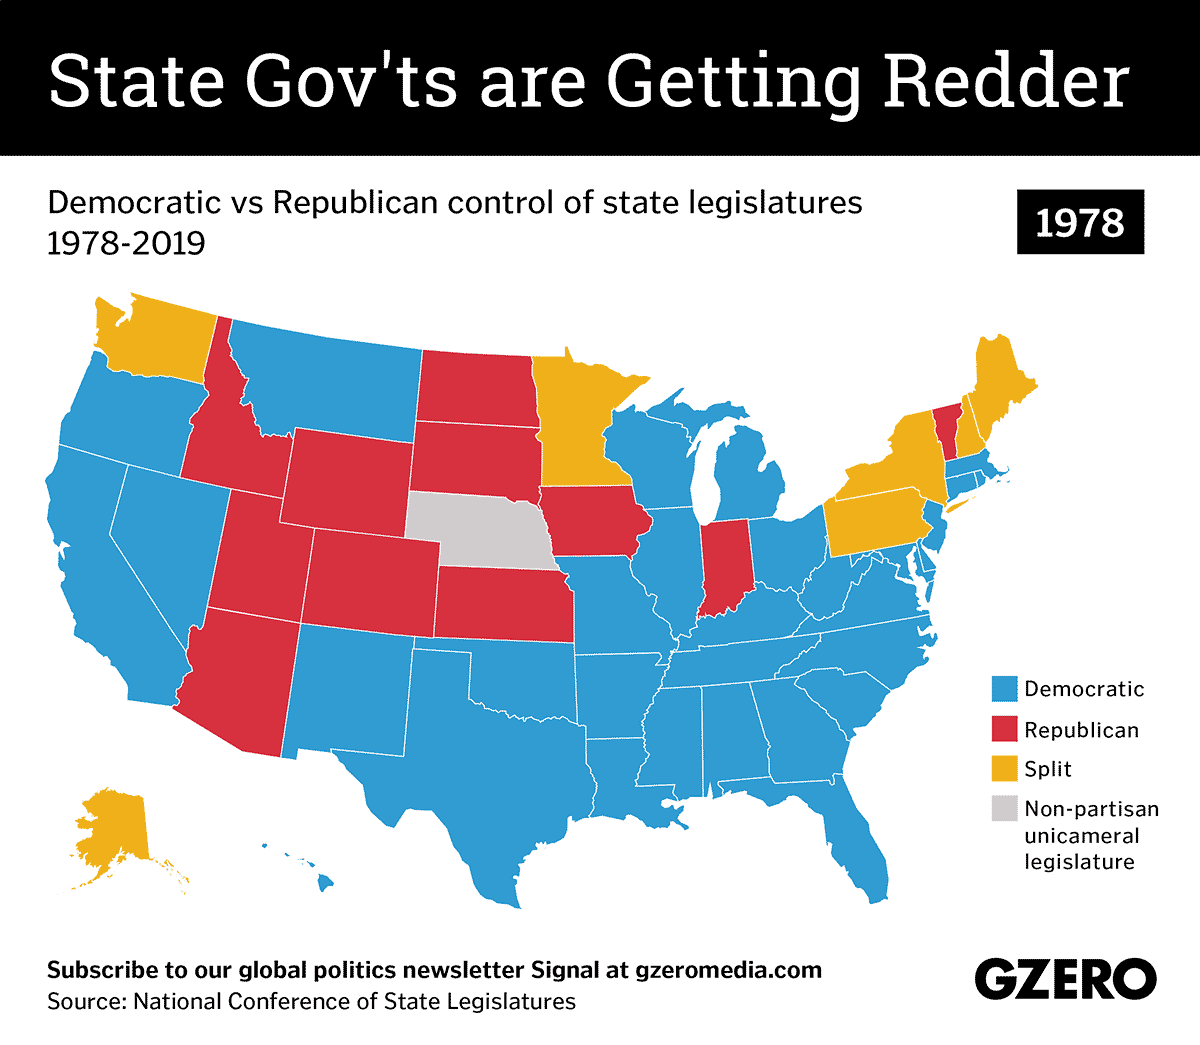 Graphic Truth: State governments are getting redder